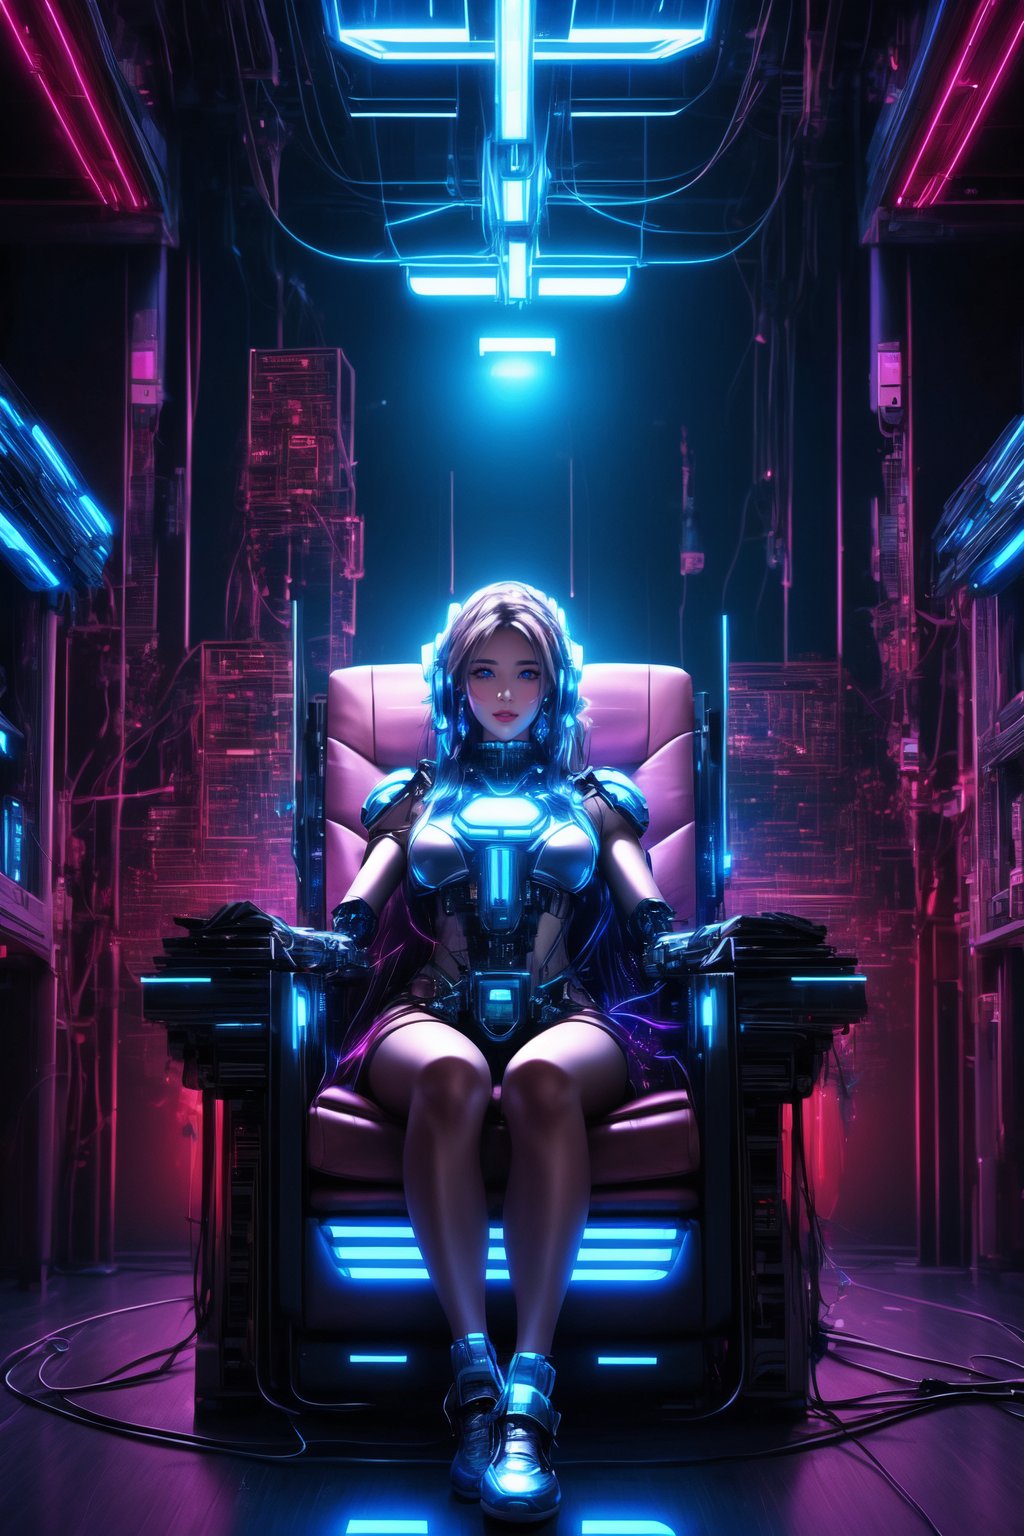 High-quality, photorealistic digital art, 64K HDR, bright-lit cyberpunk laboratory scene with a girl in mechanized armor sitting in an energy chair, surrounded by wires and futuristic instruments, symmetric composition, (Cyberpunk:1.4), (Mecha-armored girl:1.3), (energy chair:1.2), advanced technology, by FuturEvoLab, metallic textures, contrasting neon lighting, dynamic ambiance, futuristic.